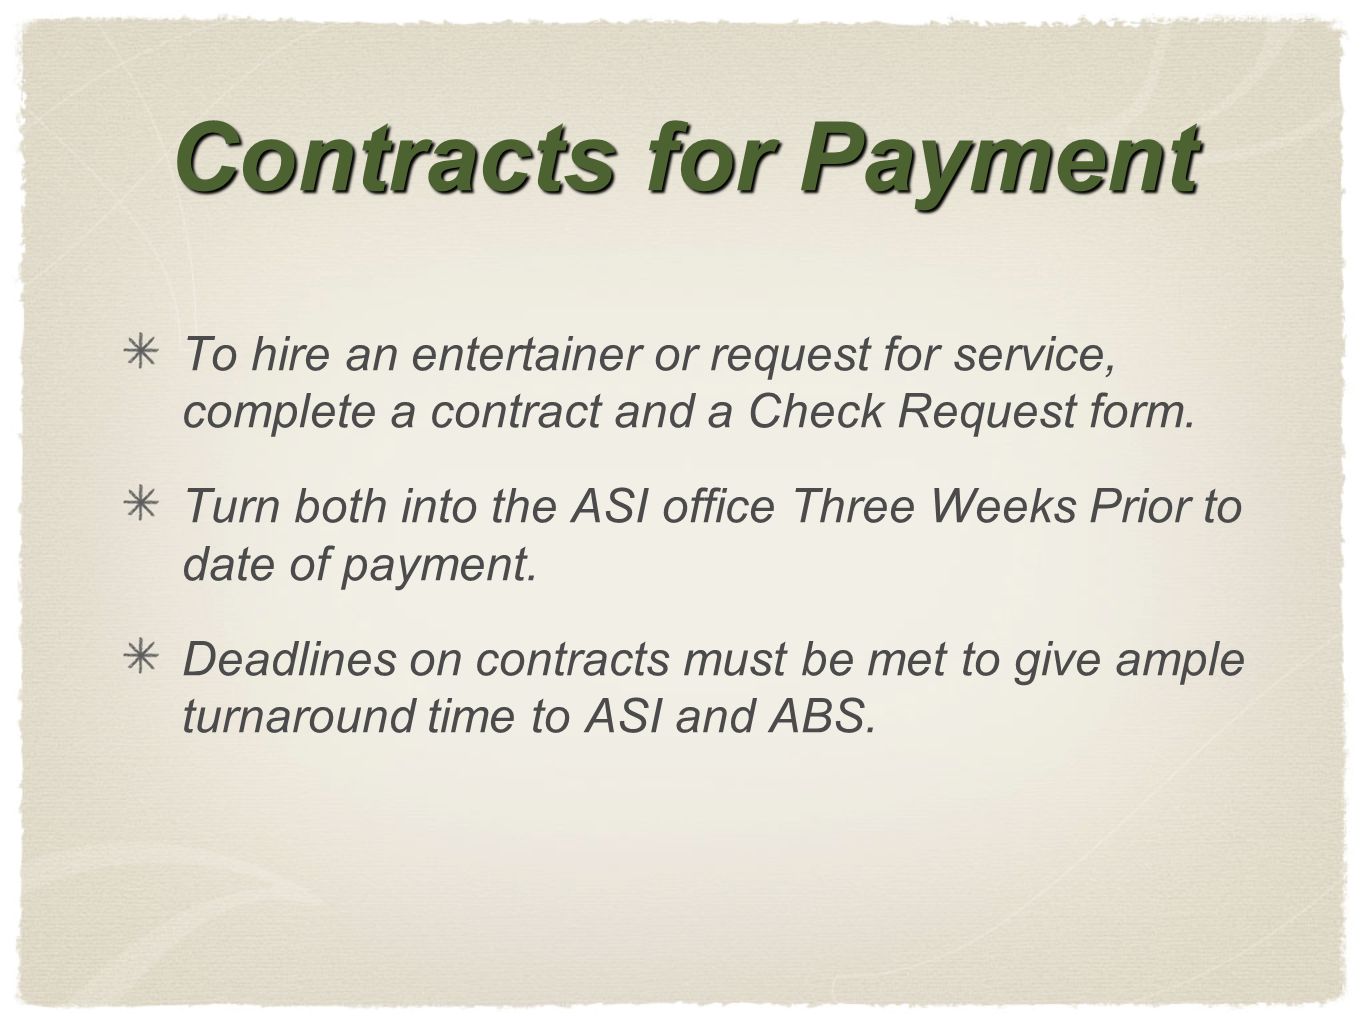 Contracts for Payment To hire an entertainer or request for service, complete a contract and a Check Request form.